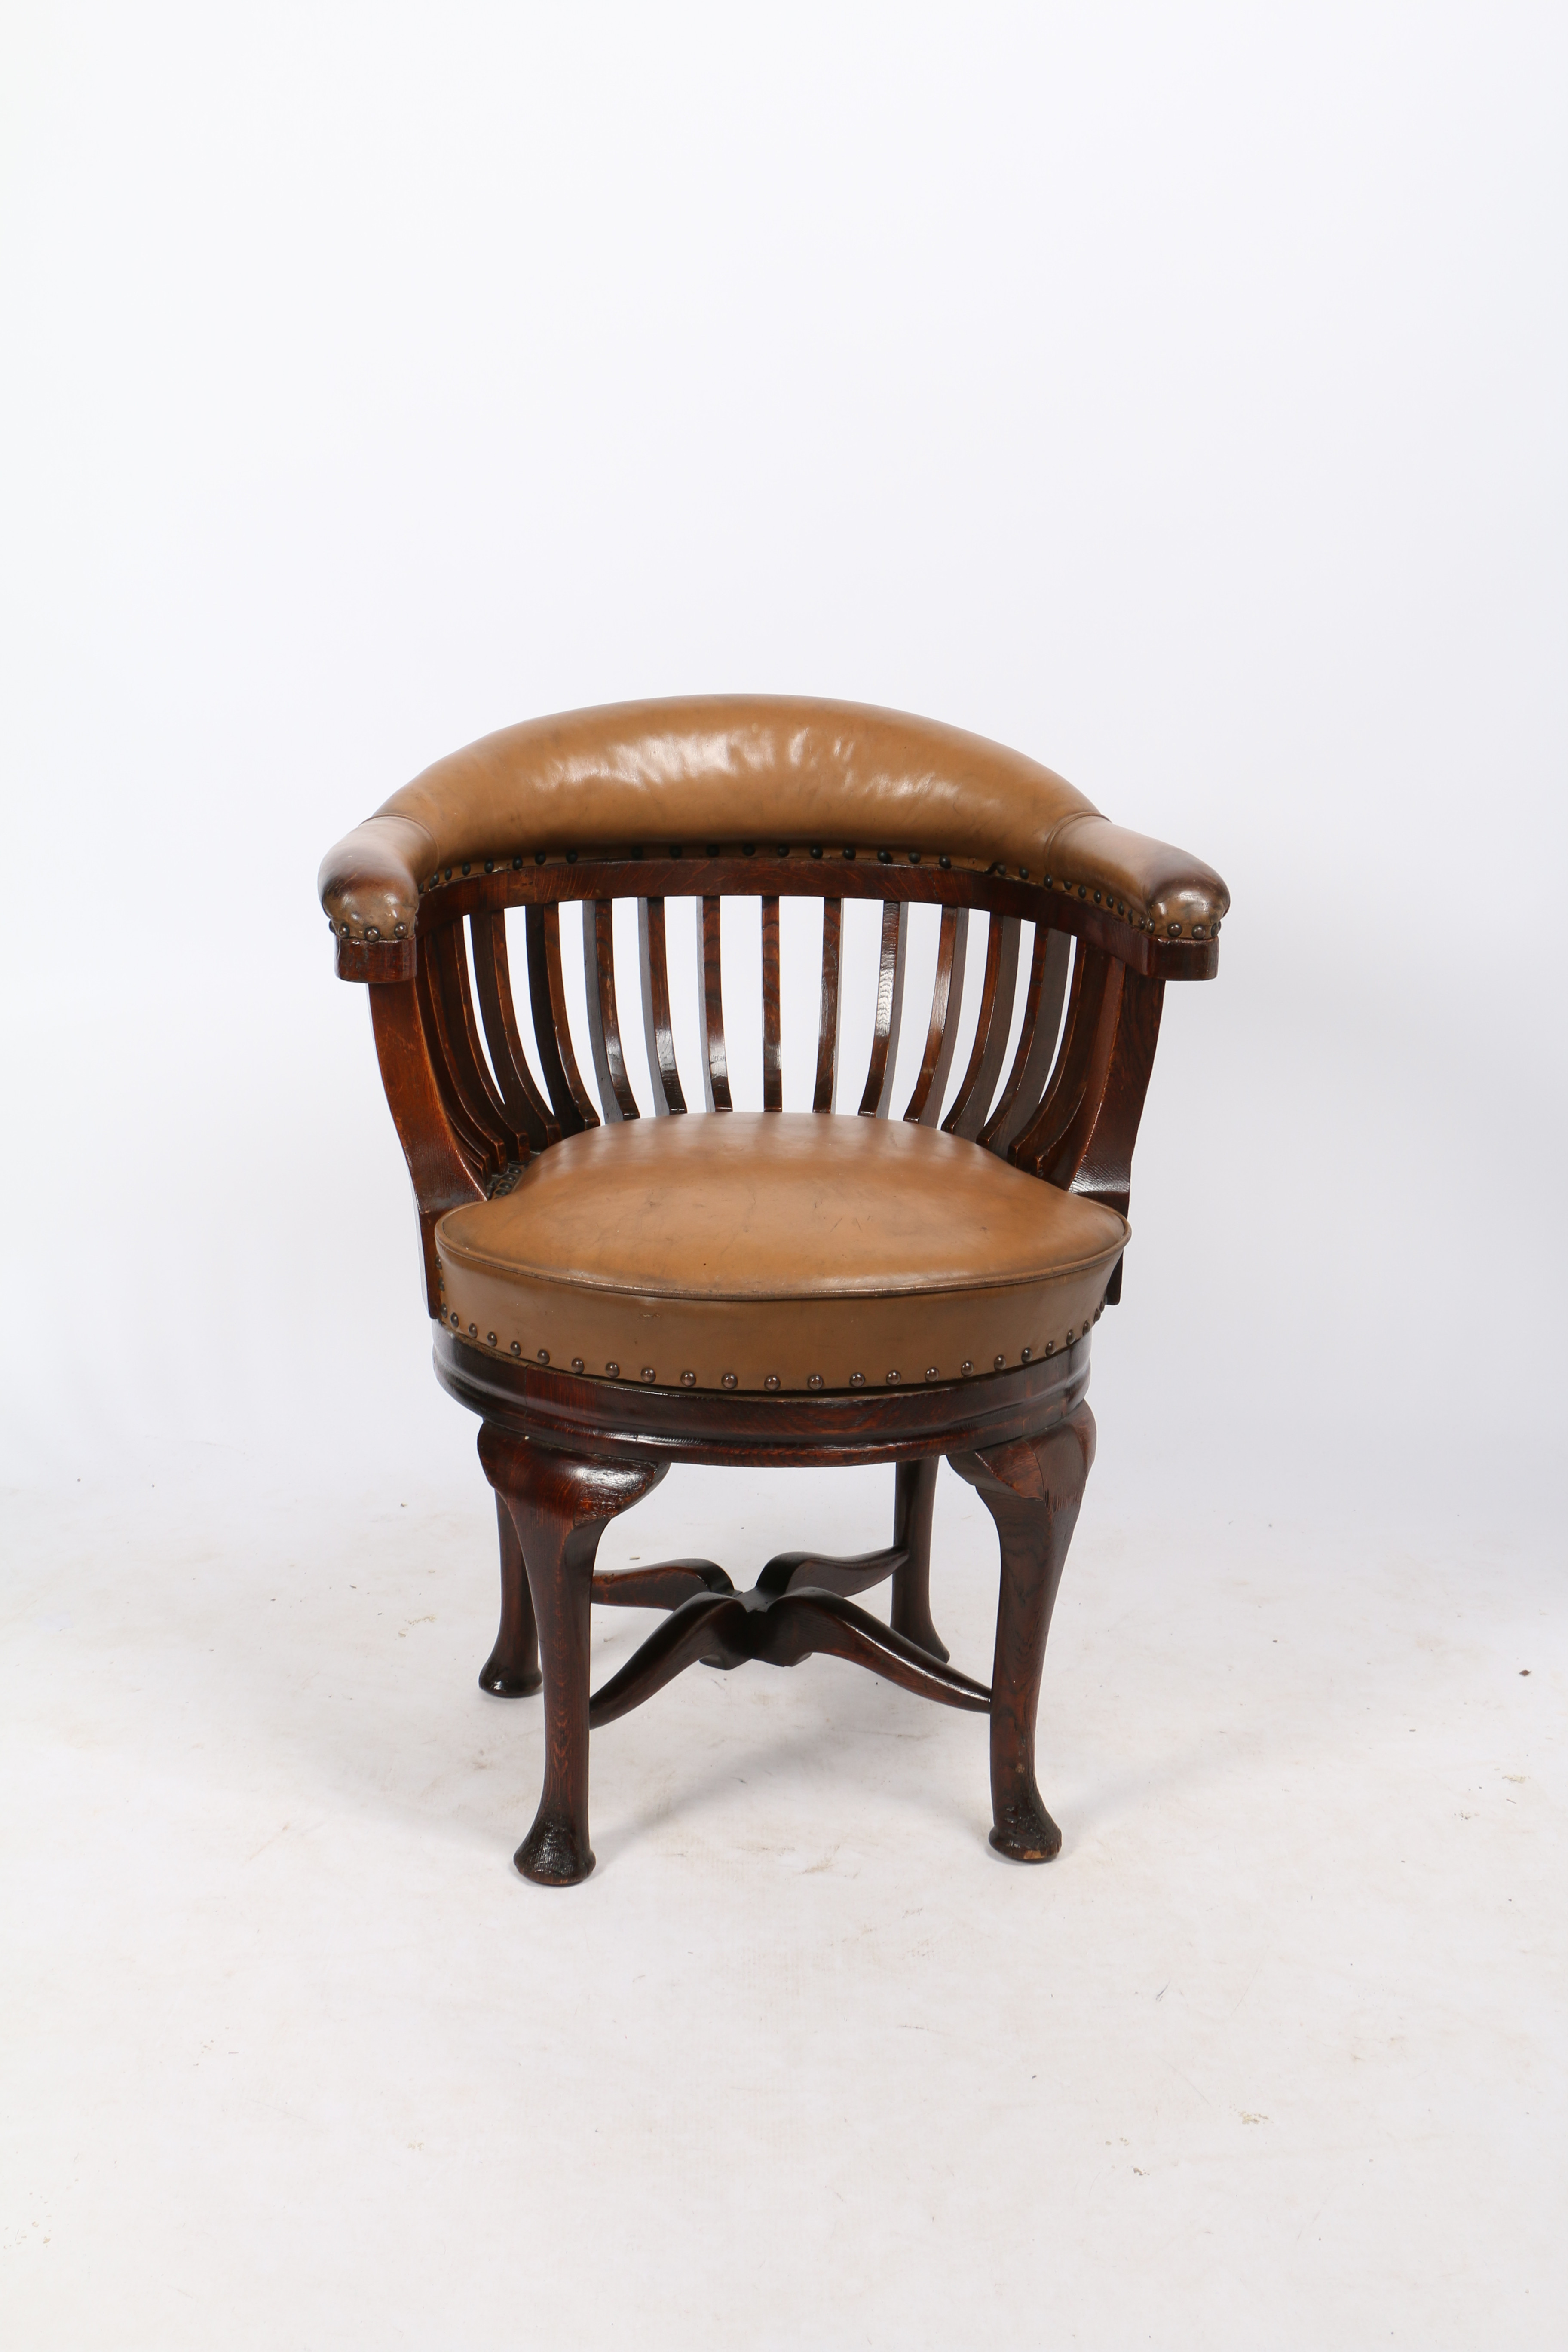 AN EARLY 20TH CENTURY OAK AND LEATHER CAPTAIN'S SWIVEL DESK CHAIR. - Image 5 of 7